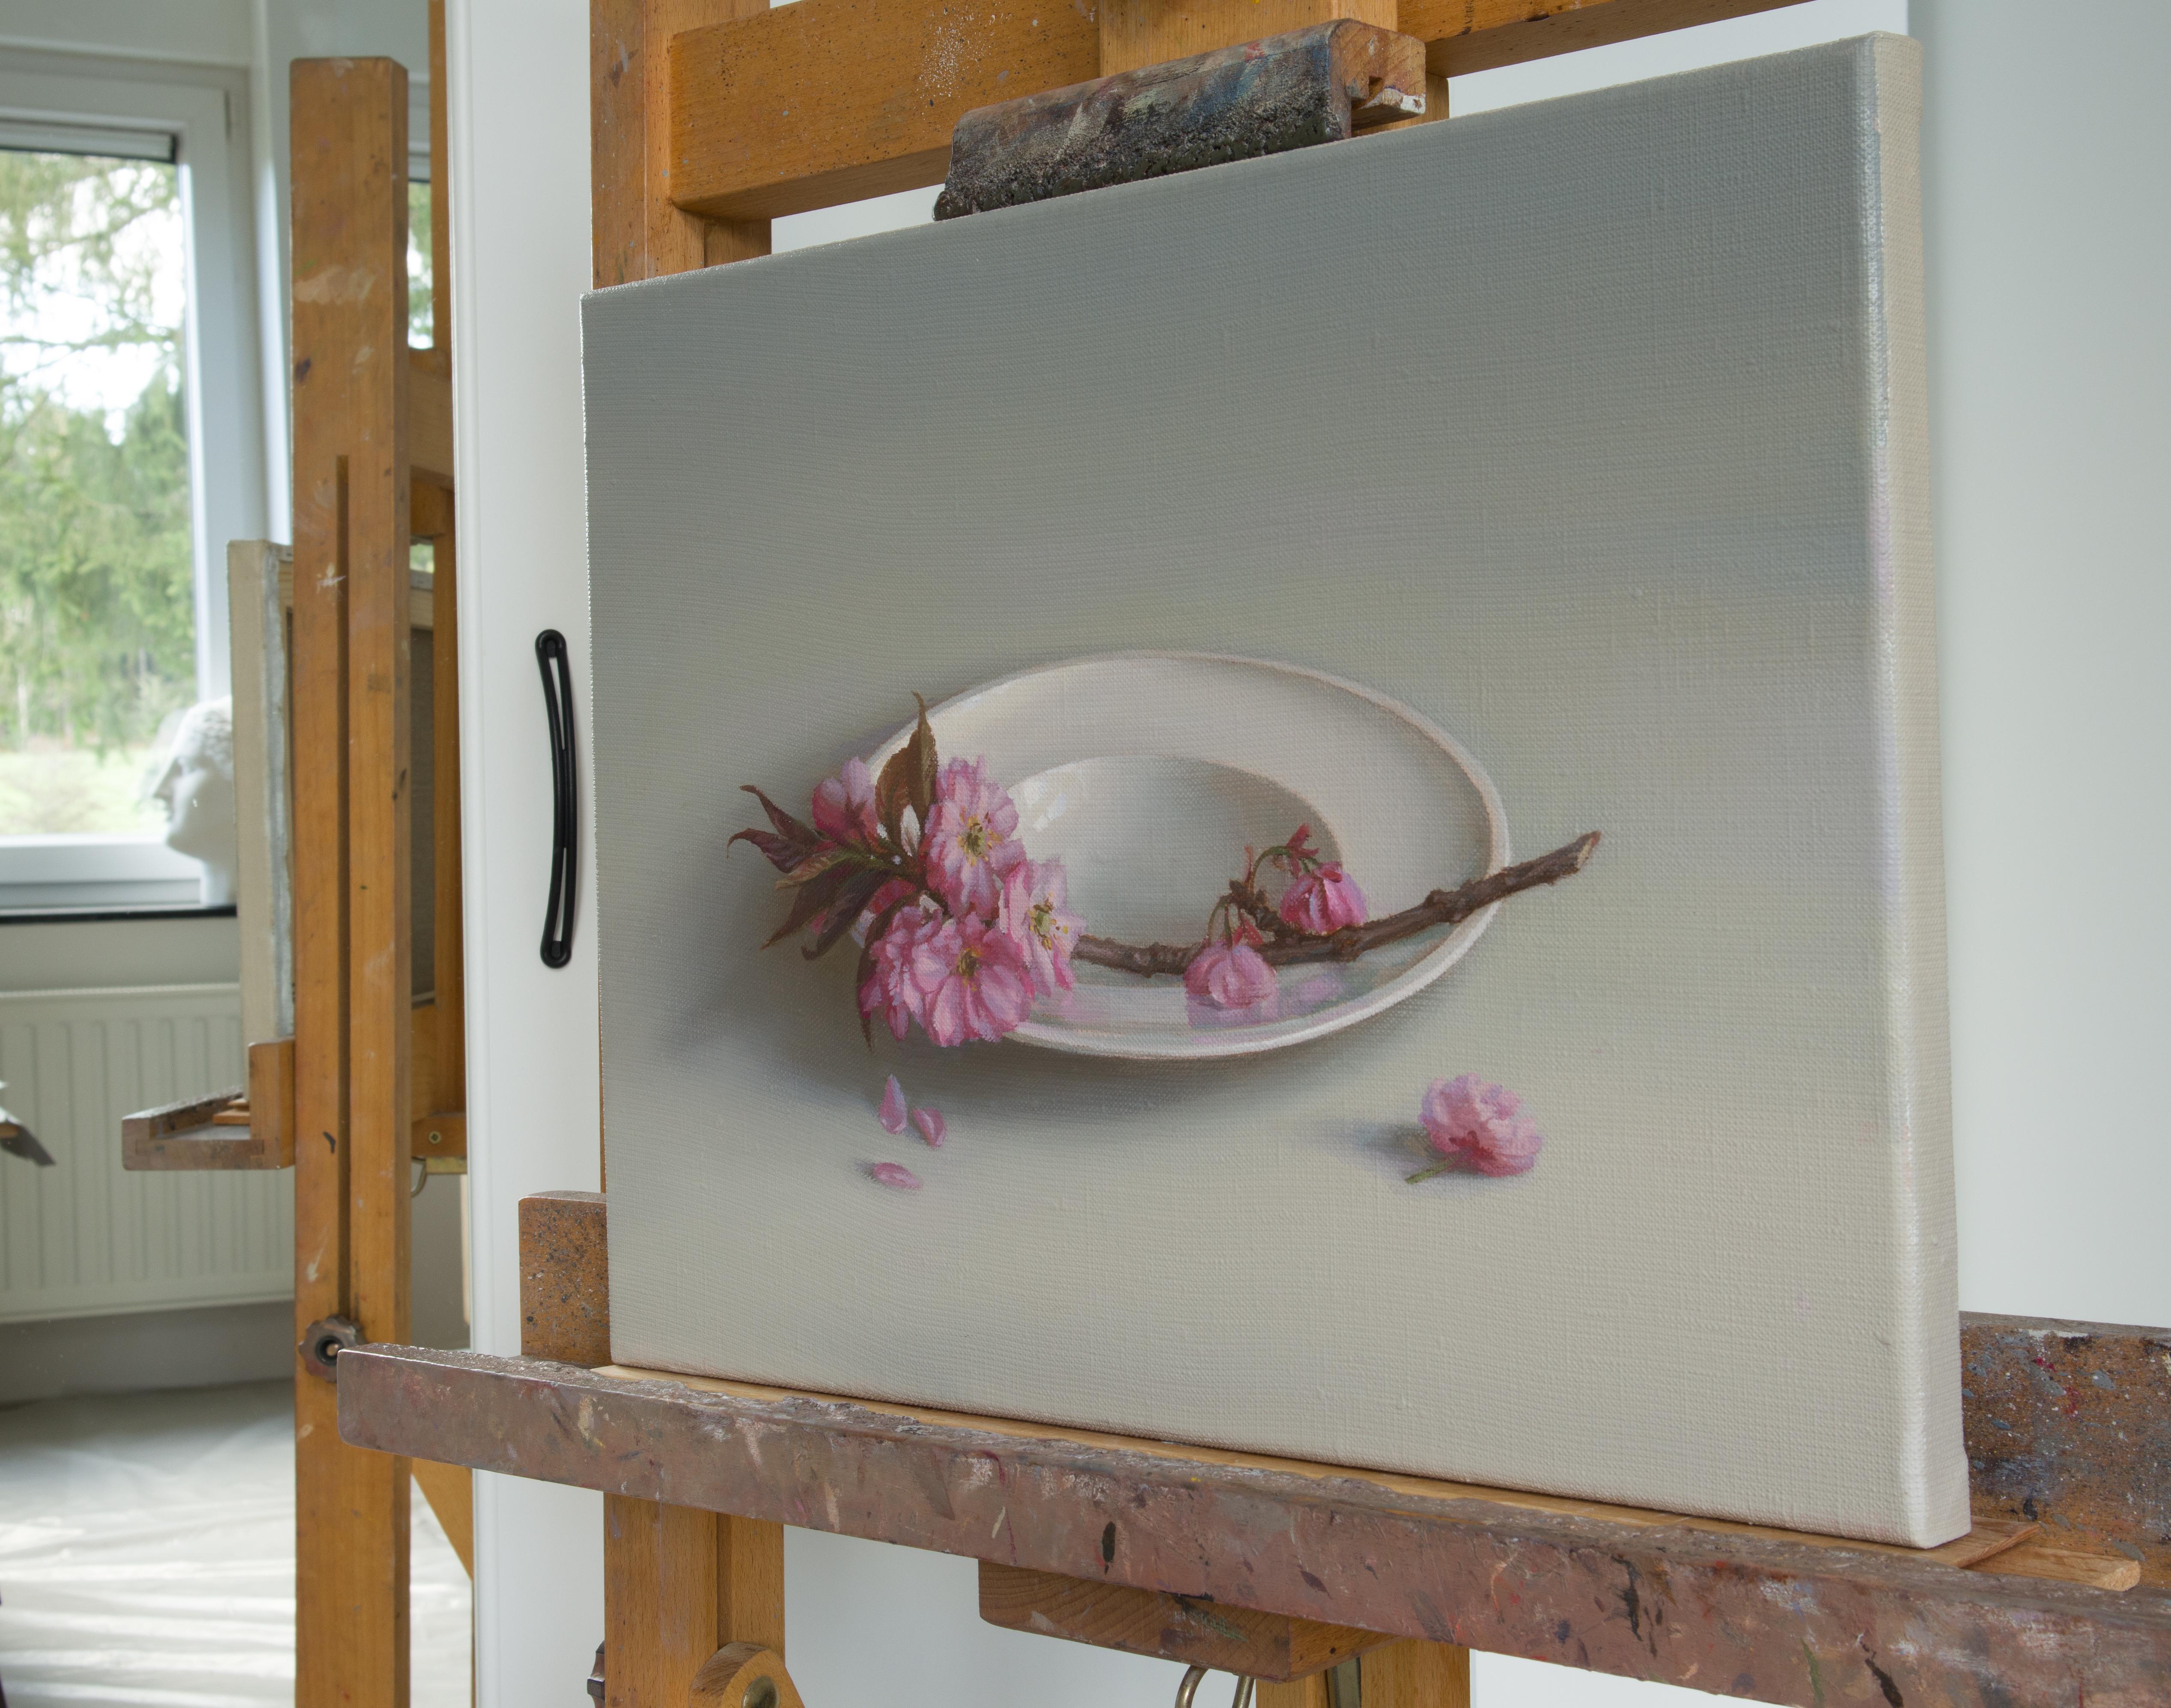 A cherry branch is placed in a smooth, neutral space. The various shades of pink color of flowers with its thin delicate petals inspire me to create this work. My intention was to keep tenderness and preciousness of flowers, a quality I wanted to